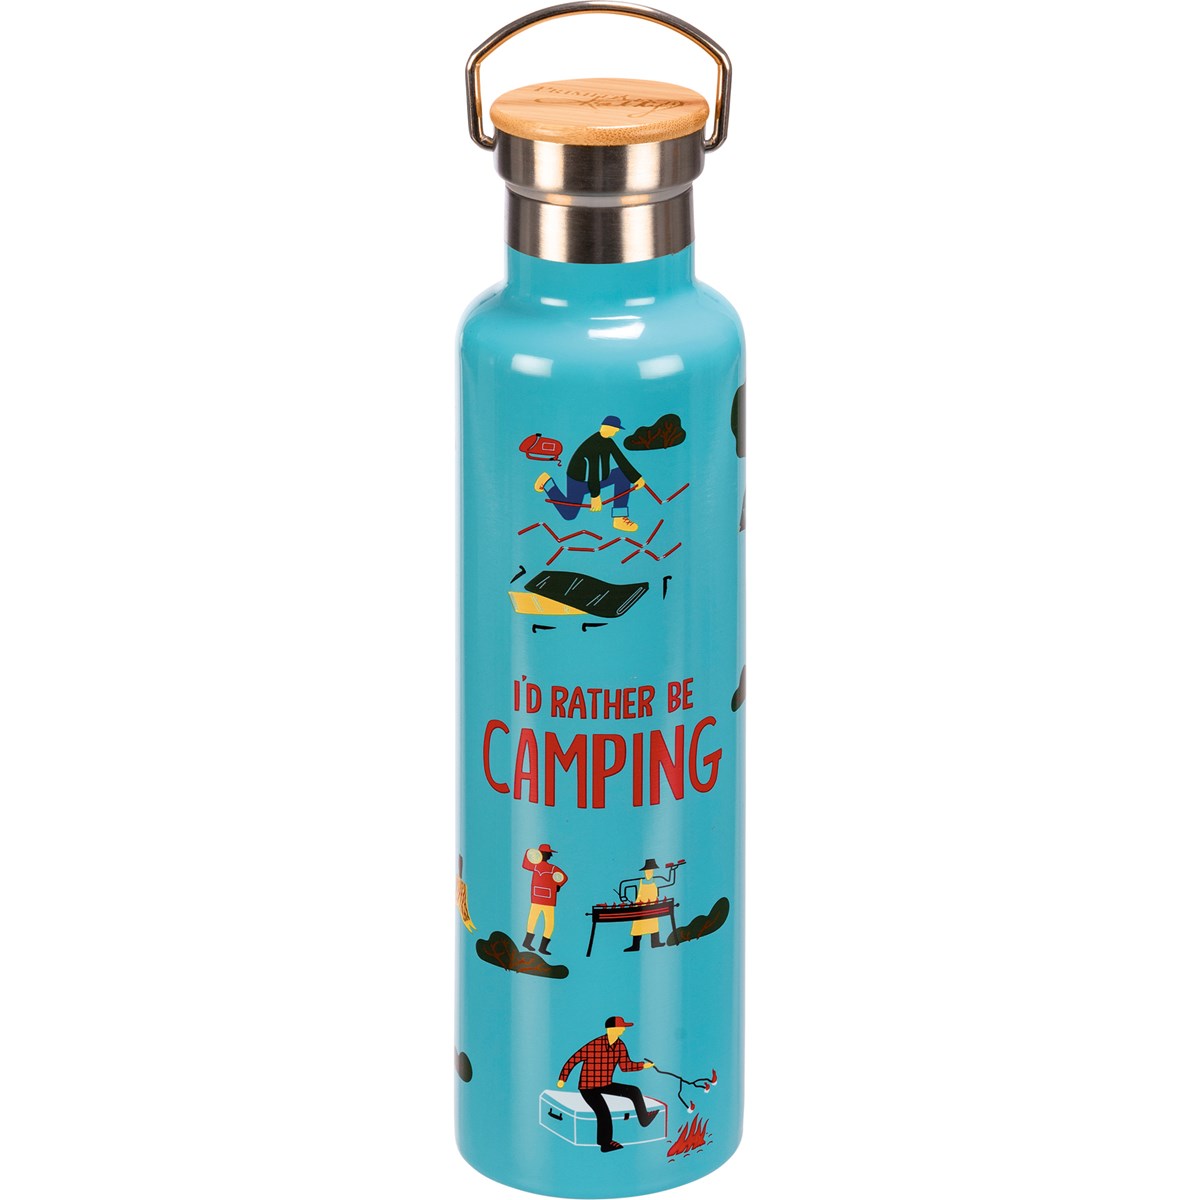 I'd Rather Be Camping Insulated Bottle - Stainless Steel, Bamboo